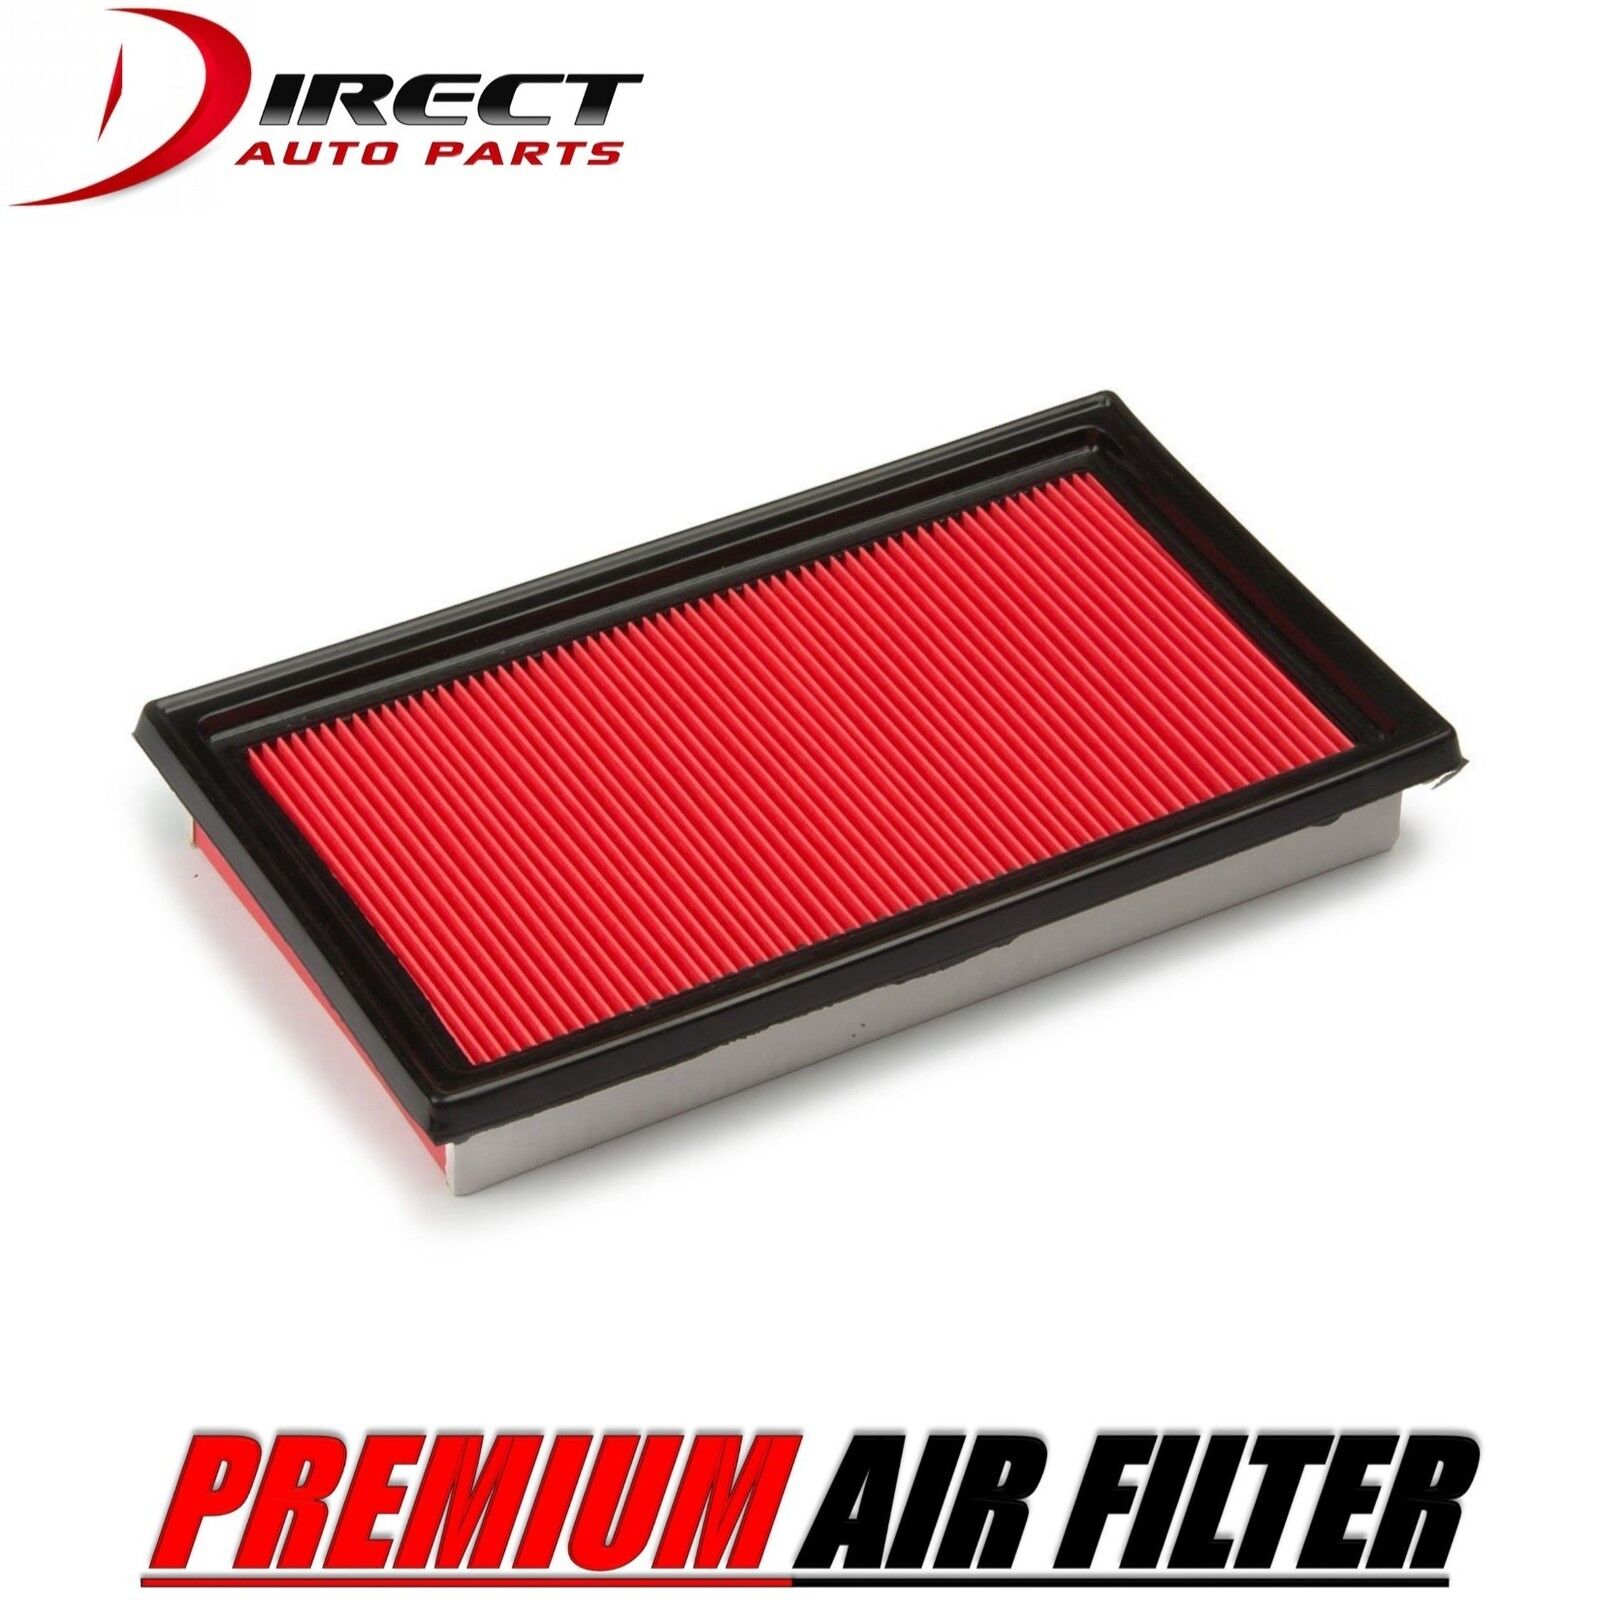 AIR FILTER FOR NISSAN FITS MAXIMA 3.5L ENGINE 2016